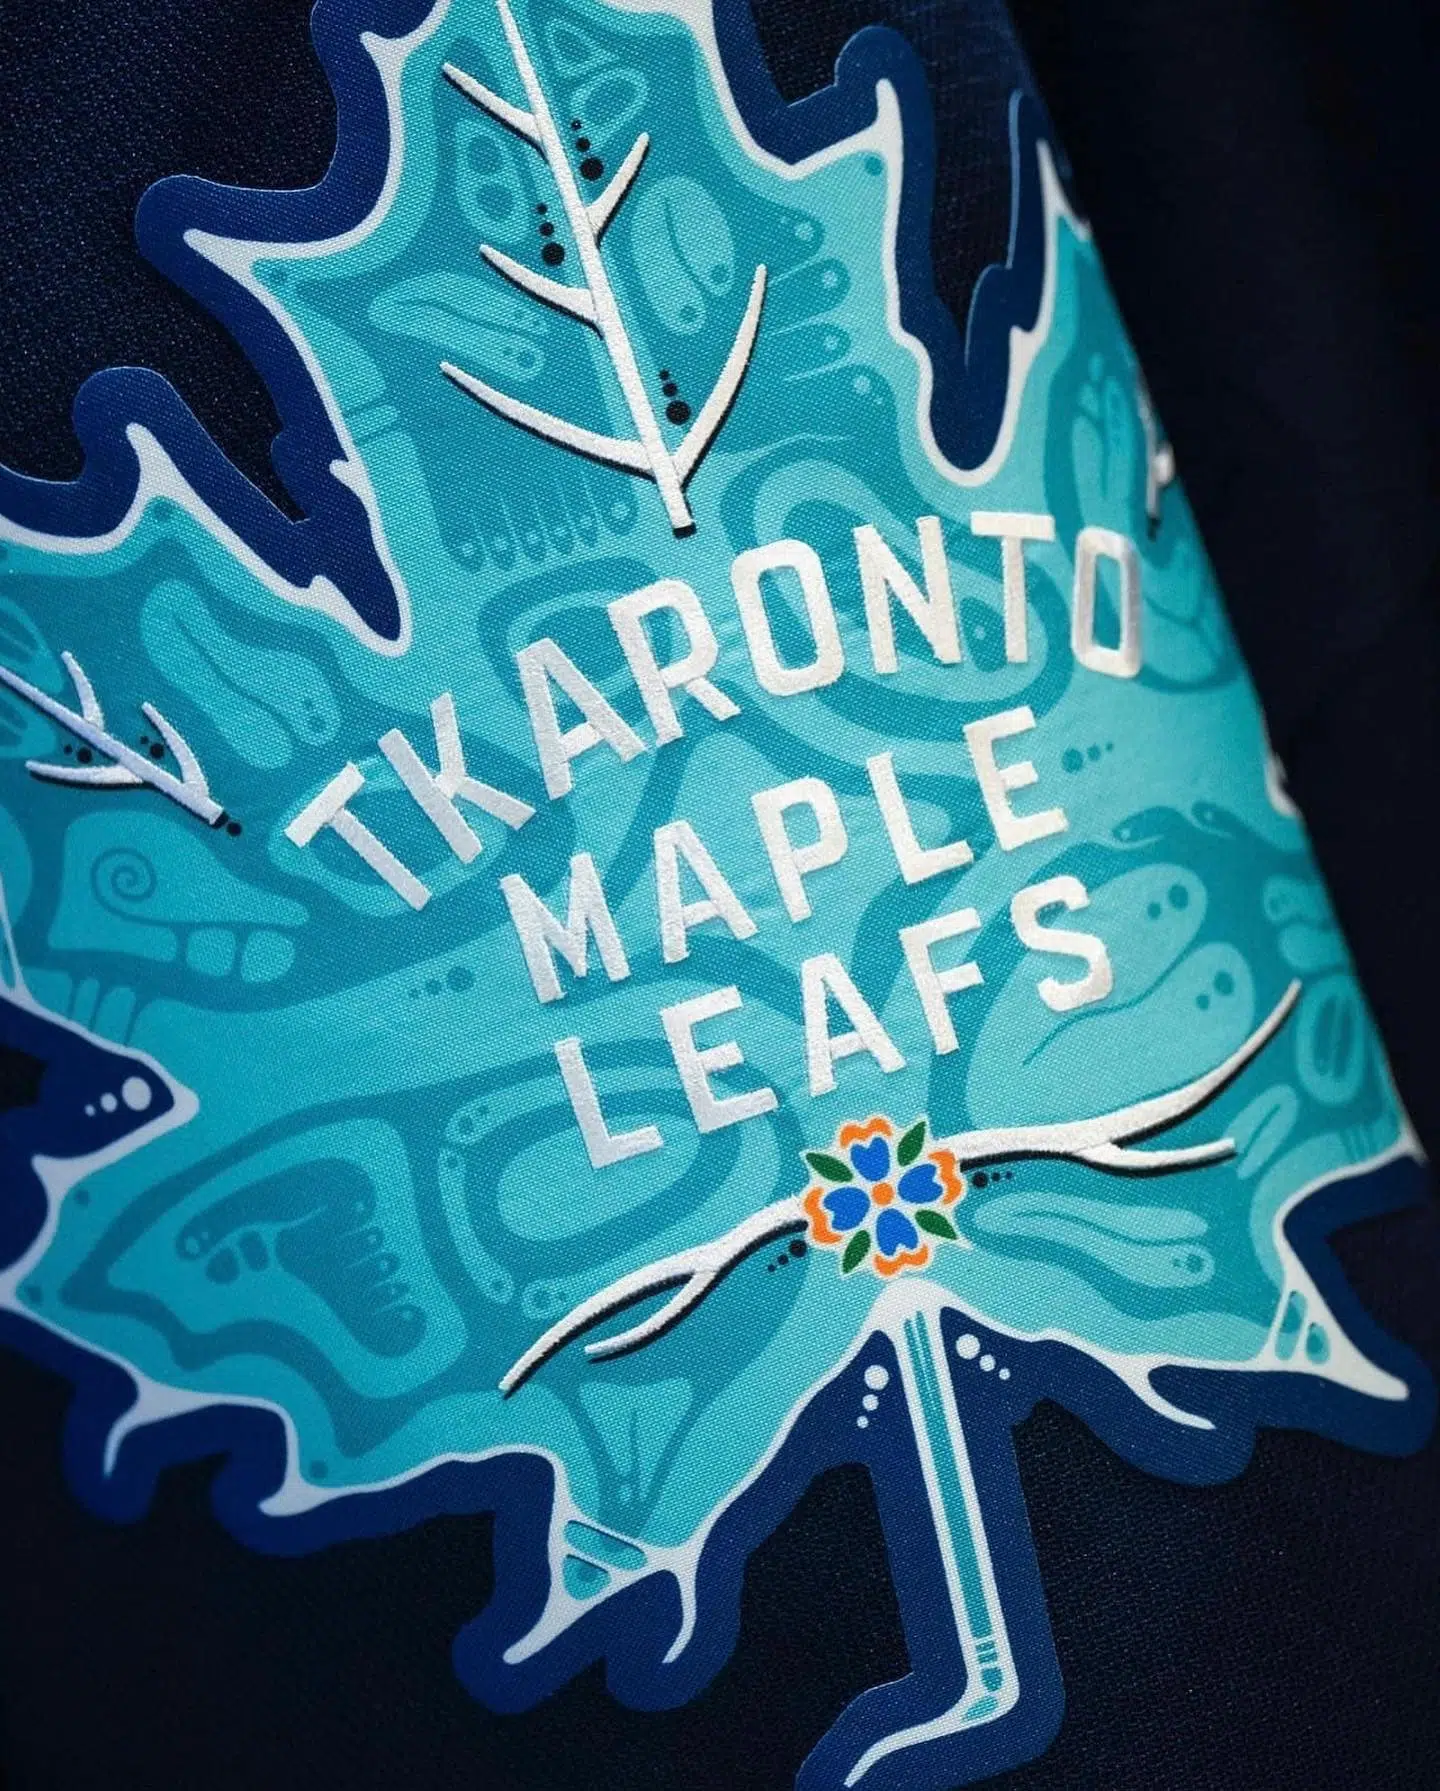 First Nations artist designed Leafs jersey for Indigenous